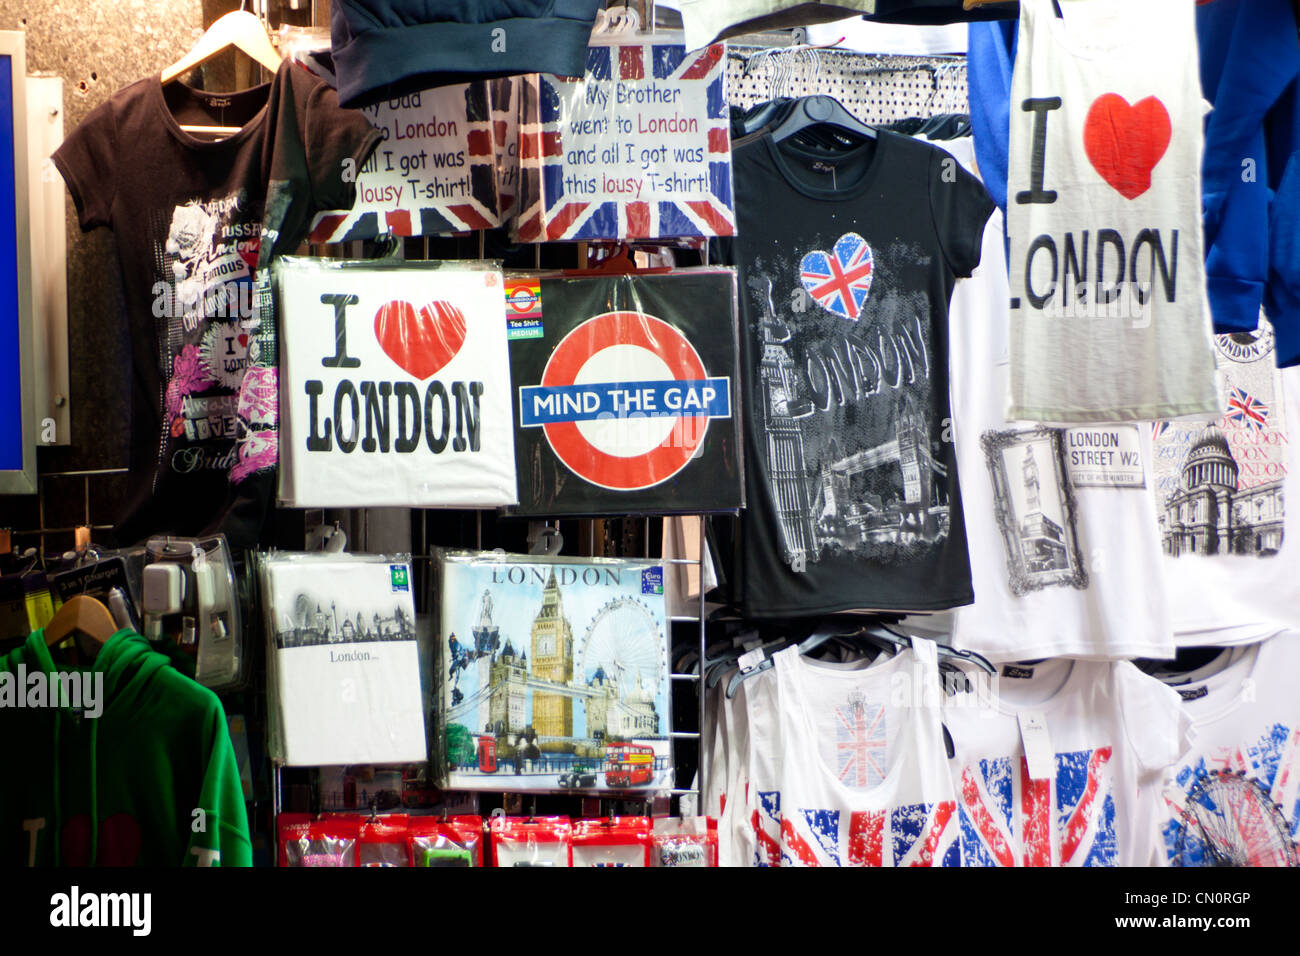 London souvenirs in shop on Shaftesbury Avenue (t-shirts, clothing ...